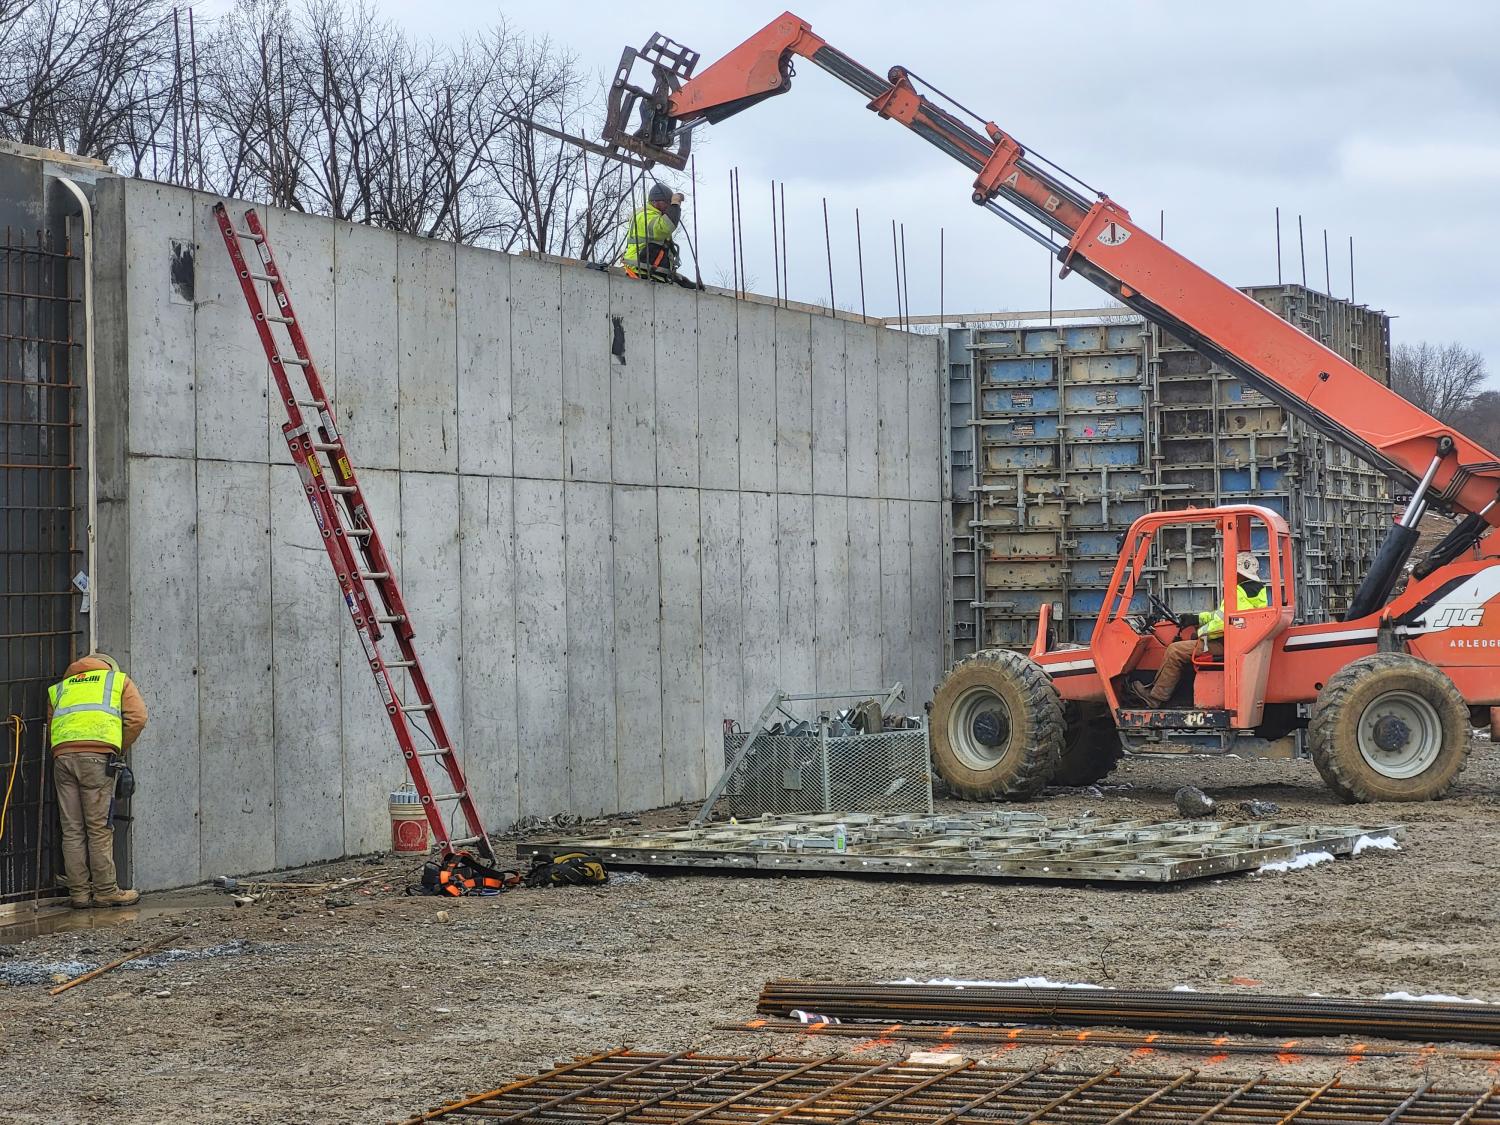 Retaining wall being erected at Lancaster High School site 